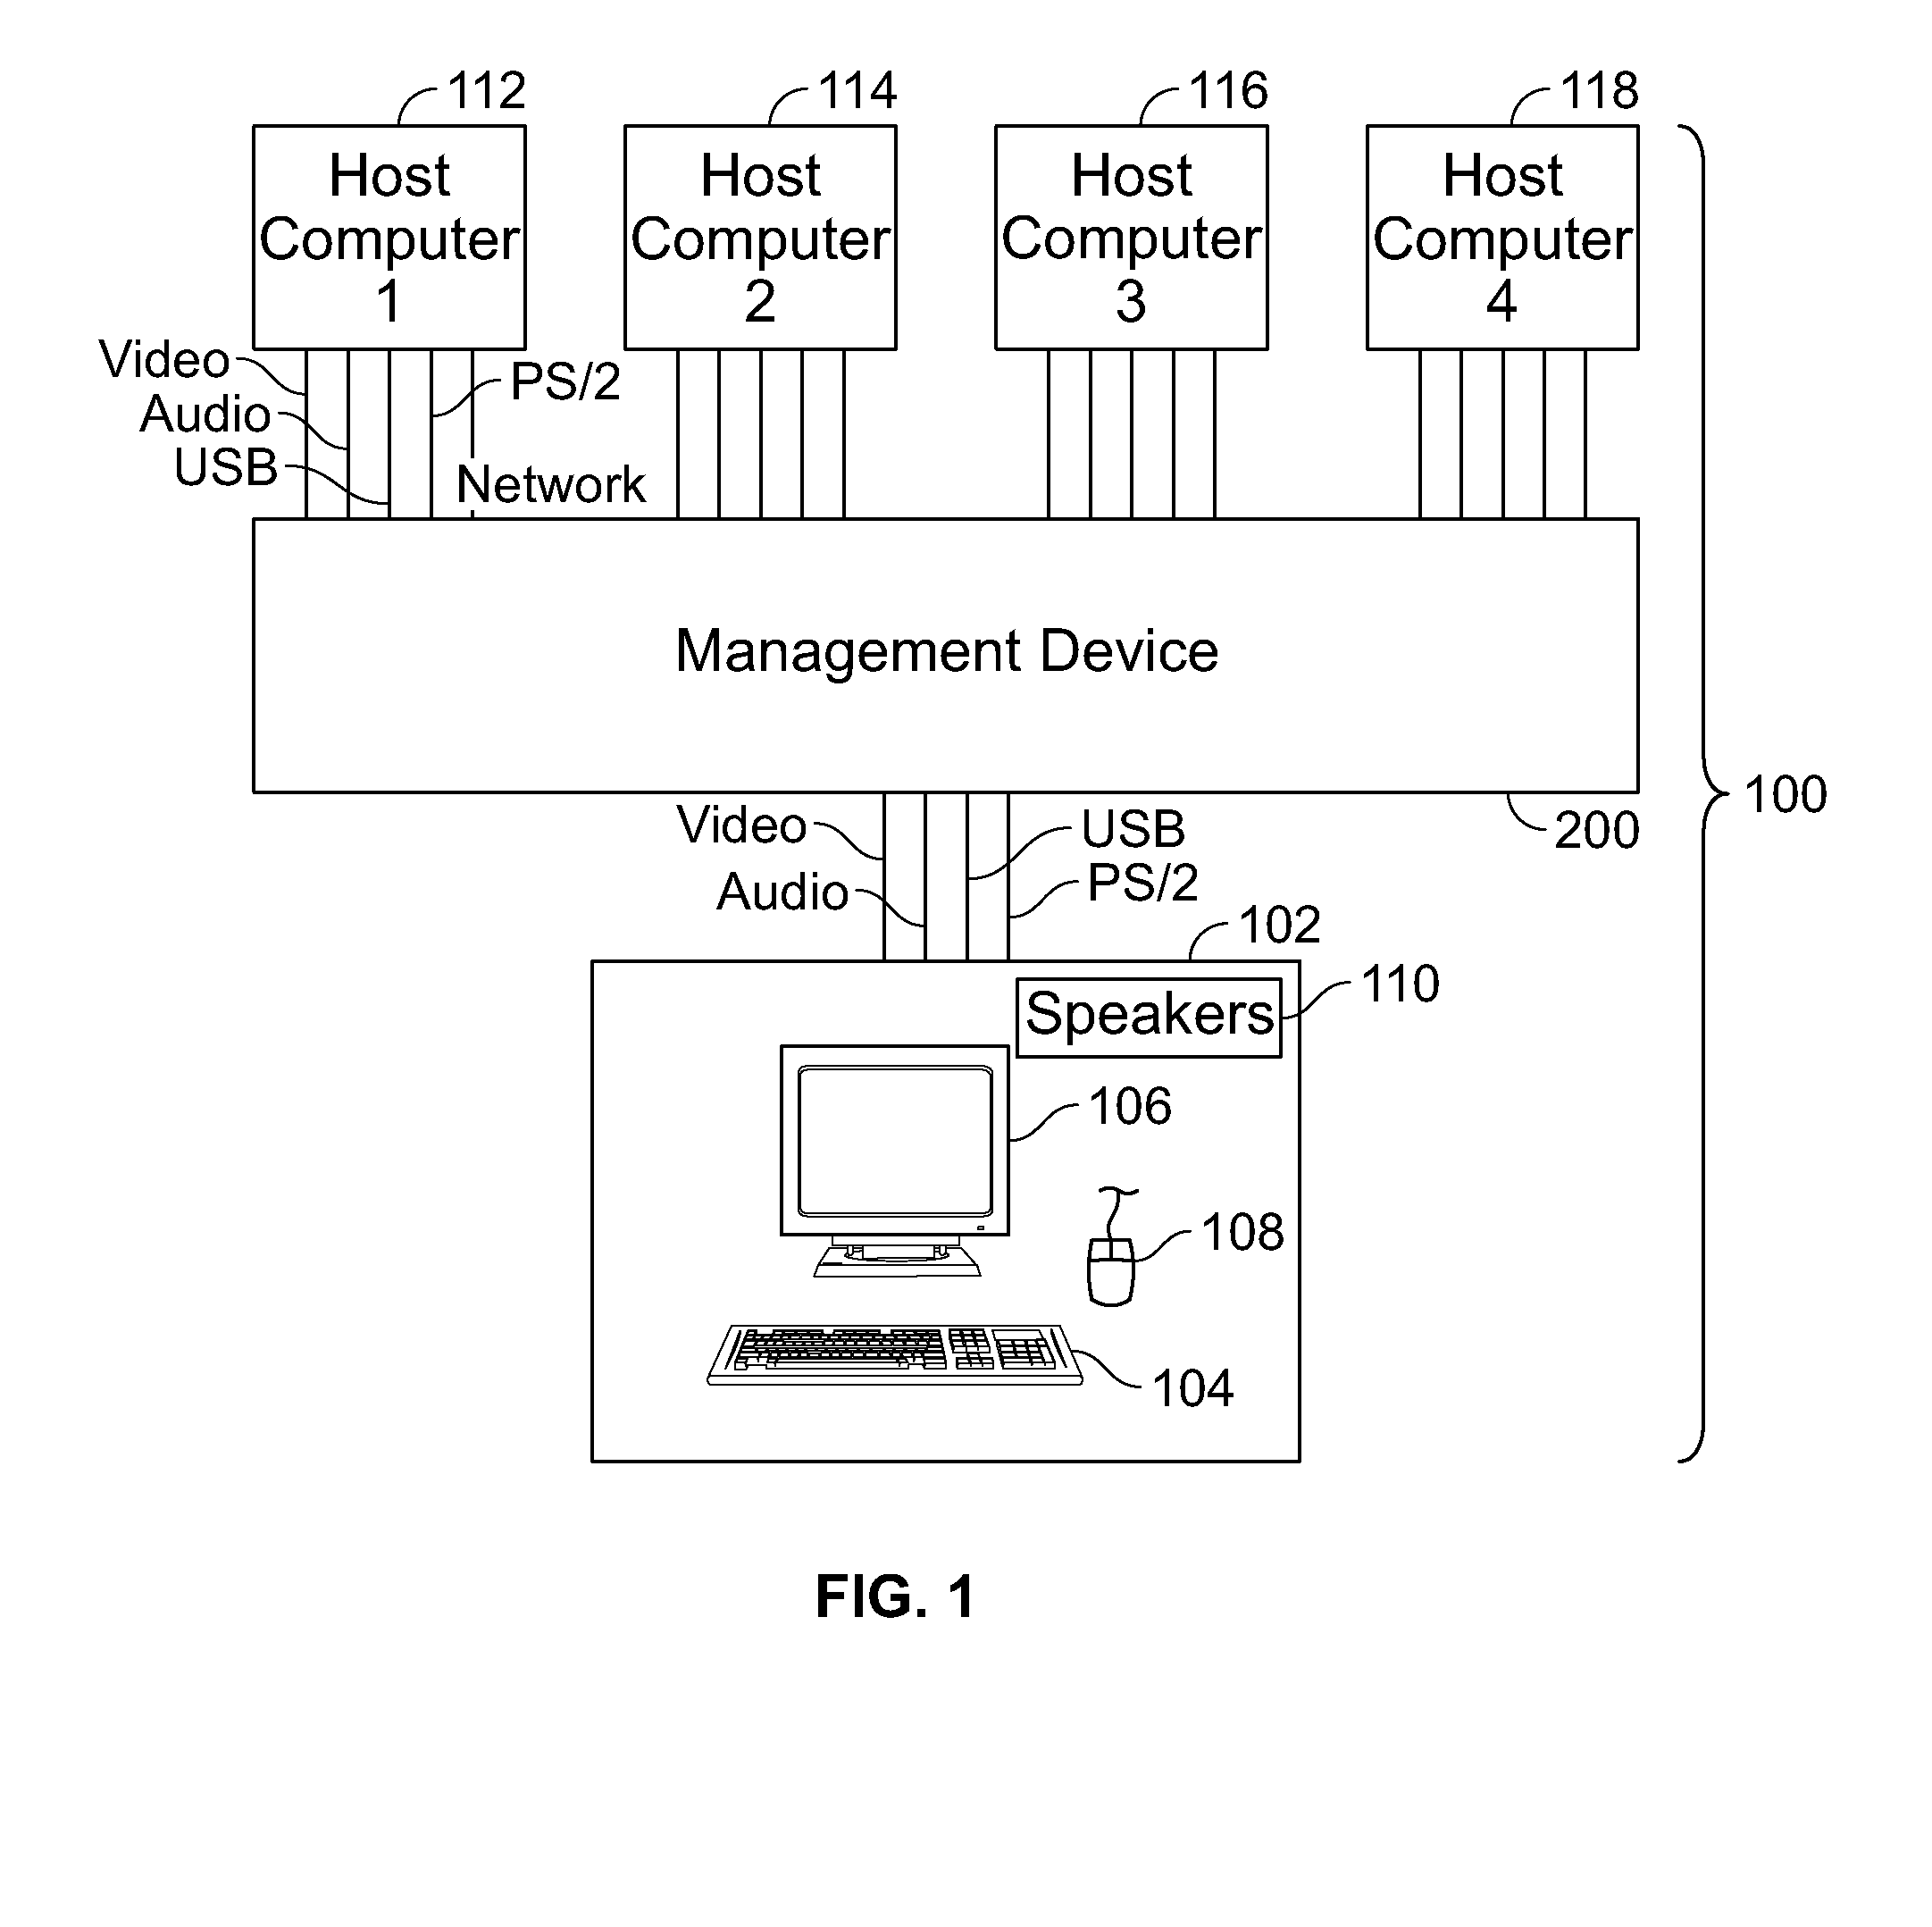 Apparatus and System for Managing Multiple Computers